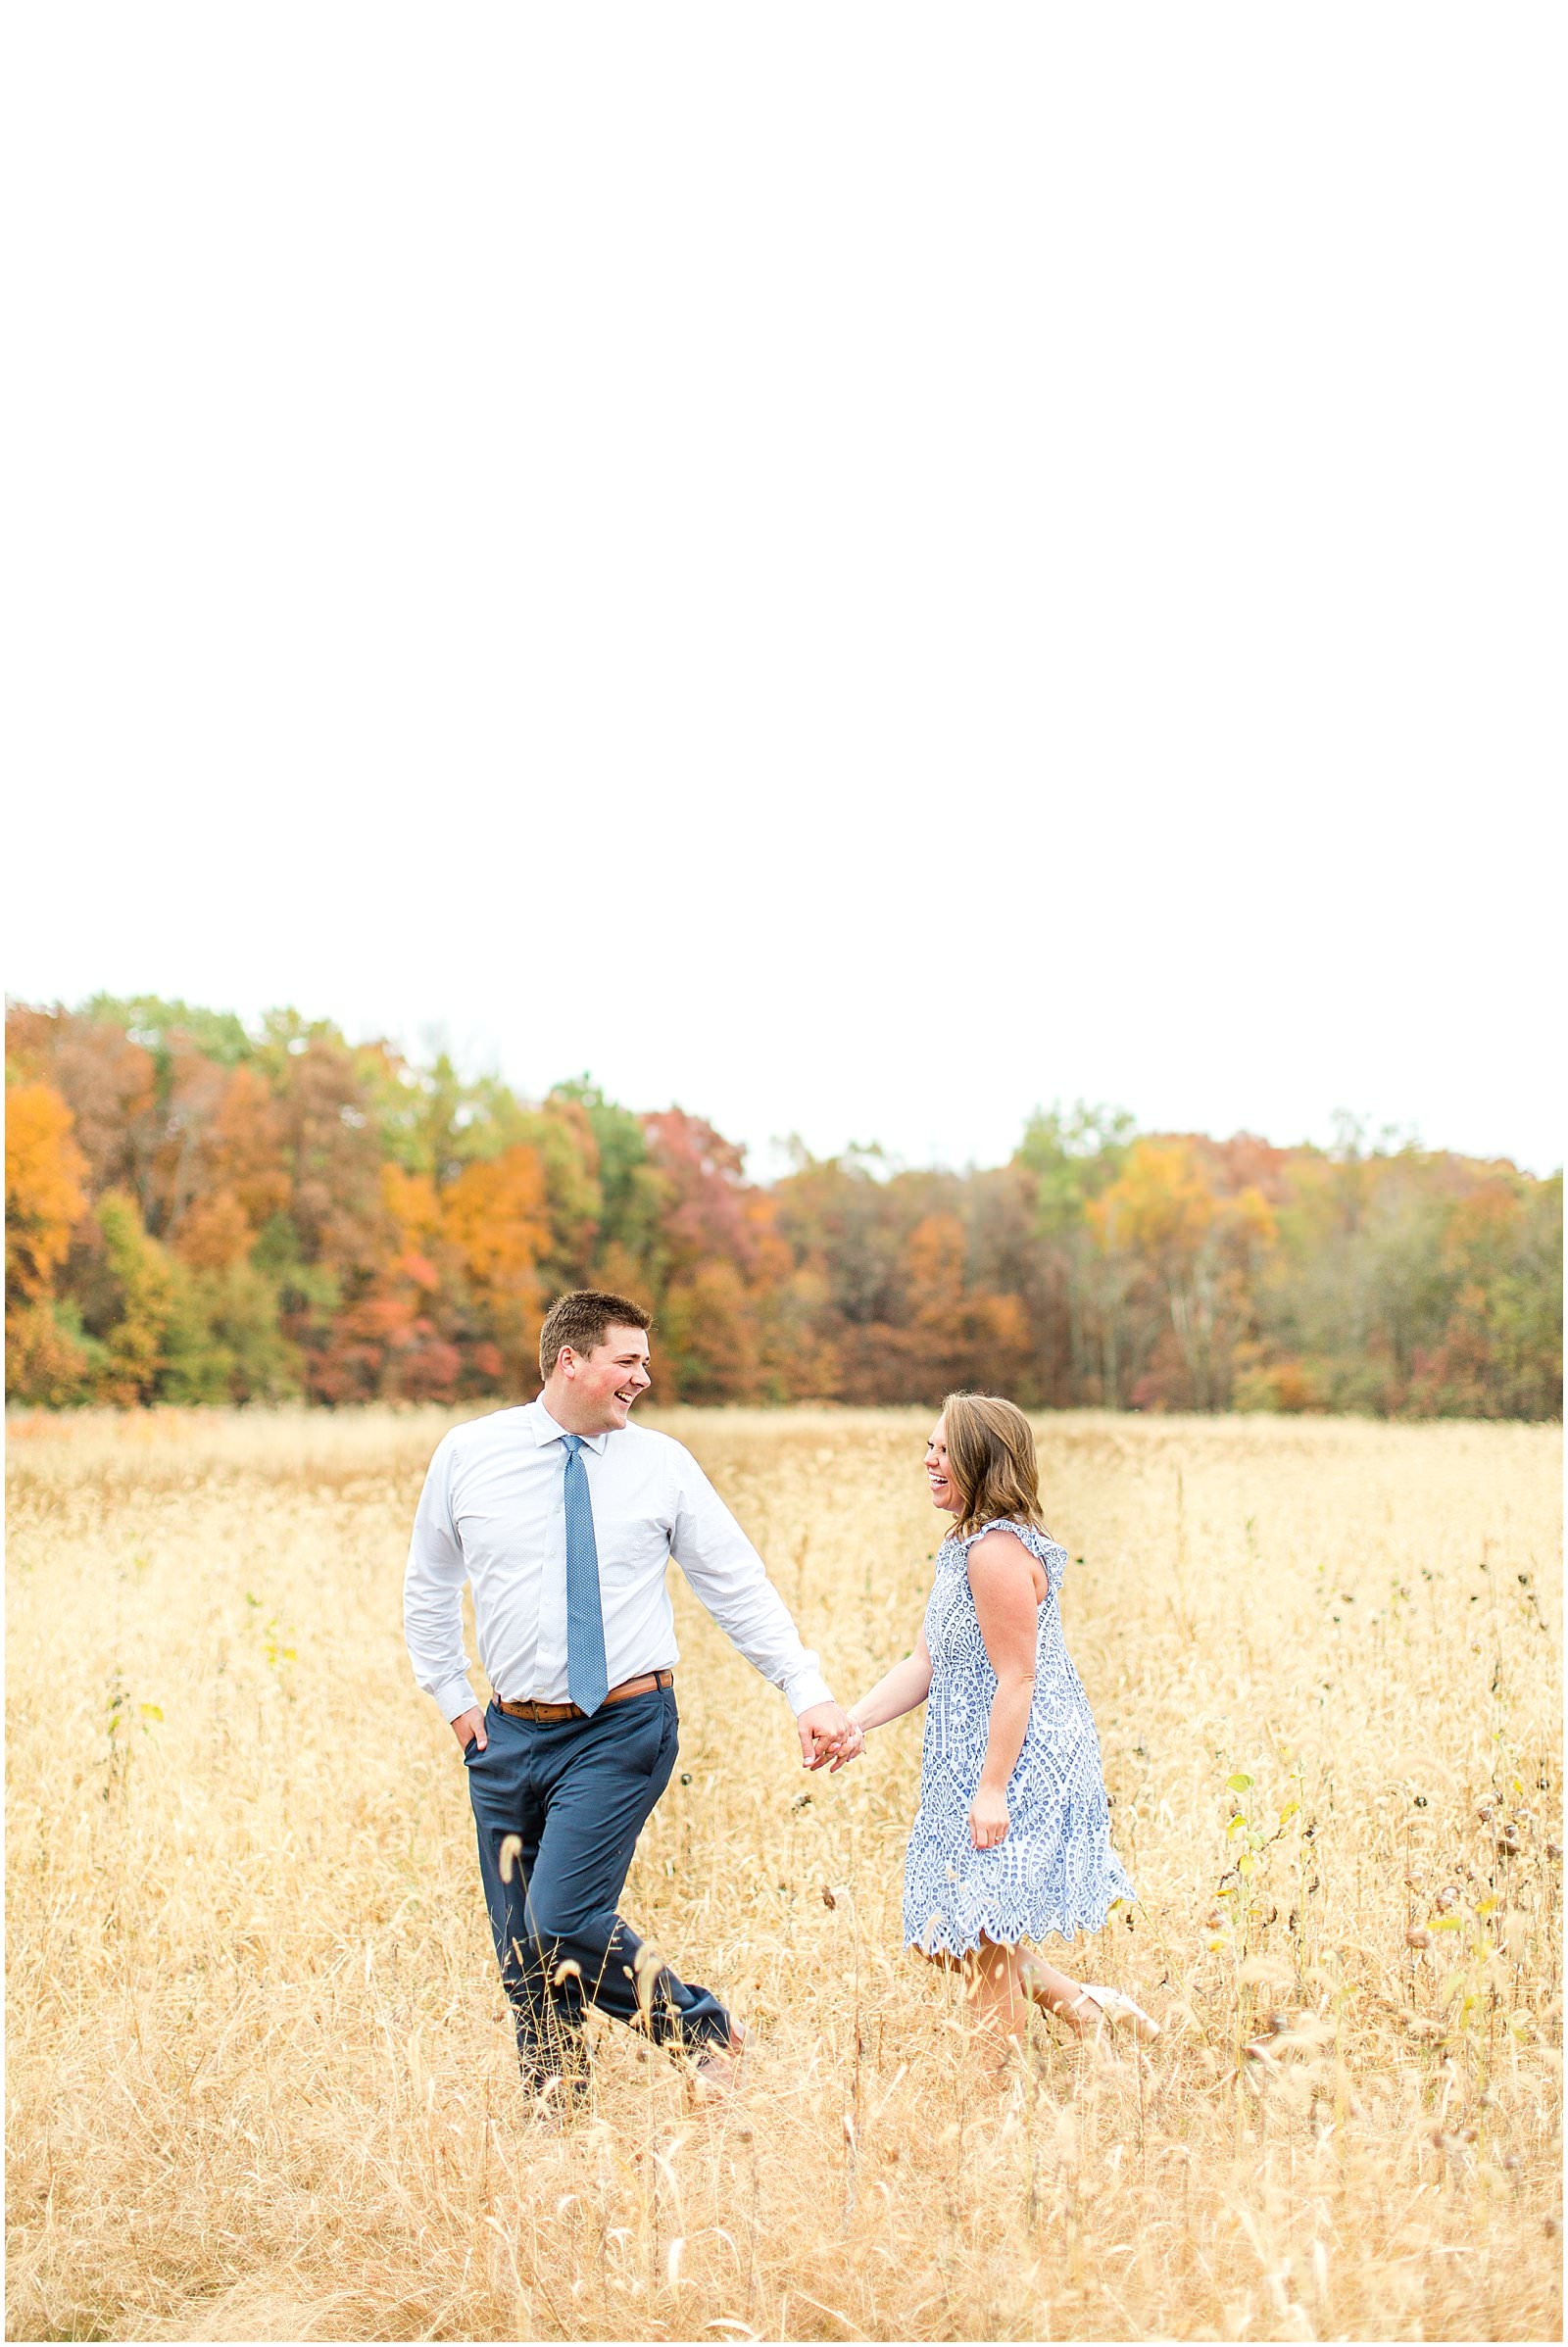 A Southern Illinois Engagement Session | Roxanne and Matthew | Bret and Brandie Photography 0029.jpg